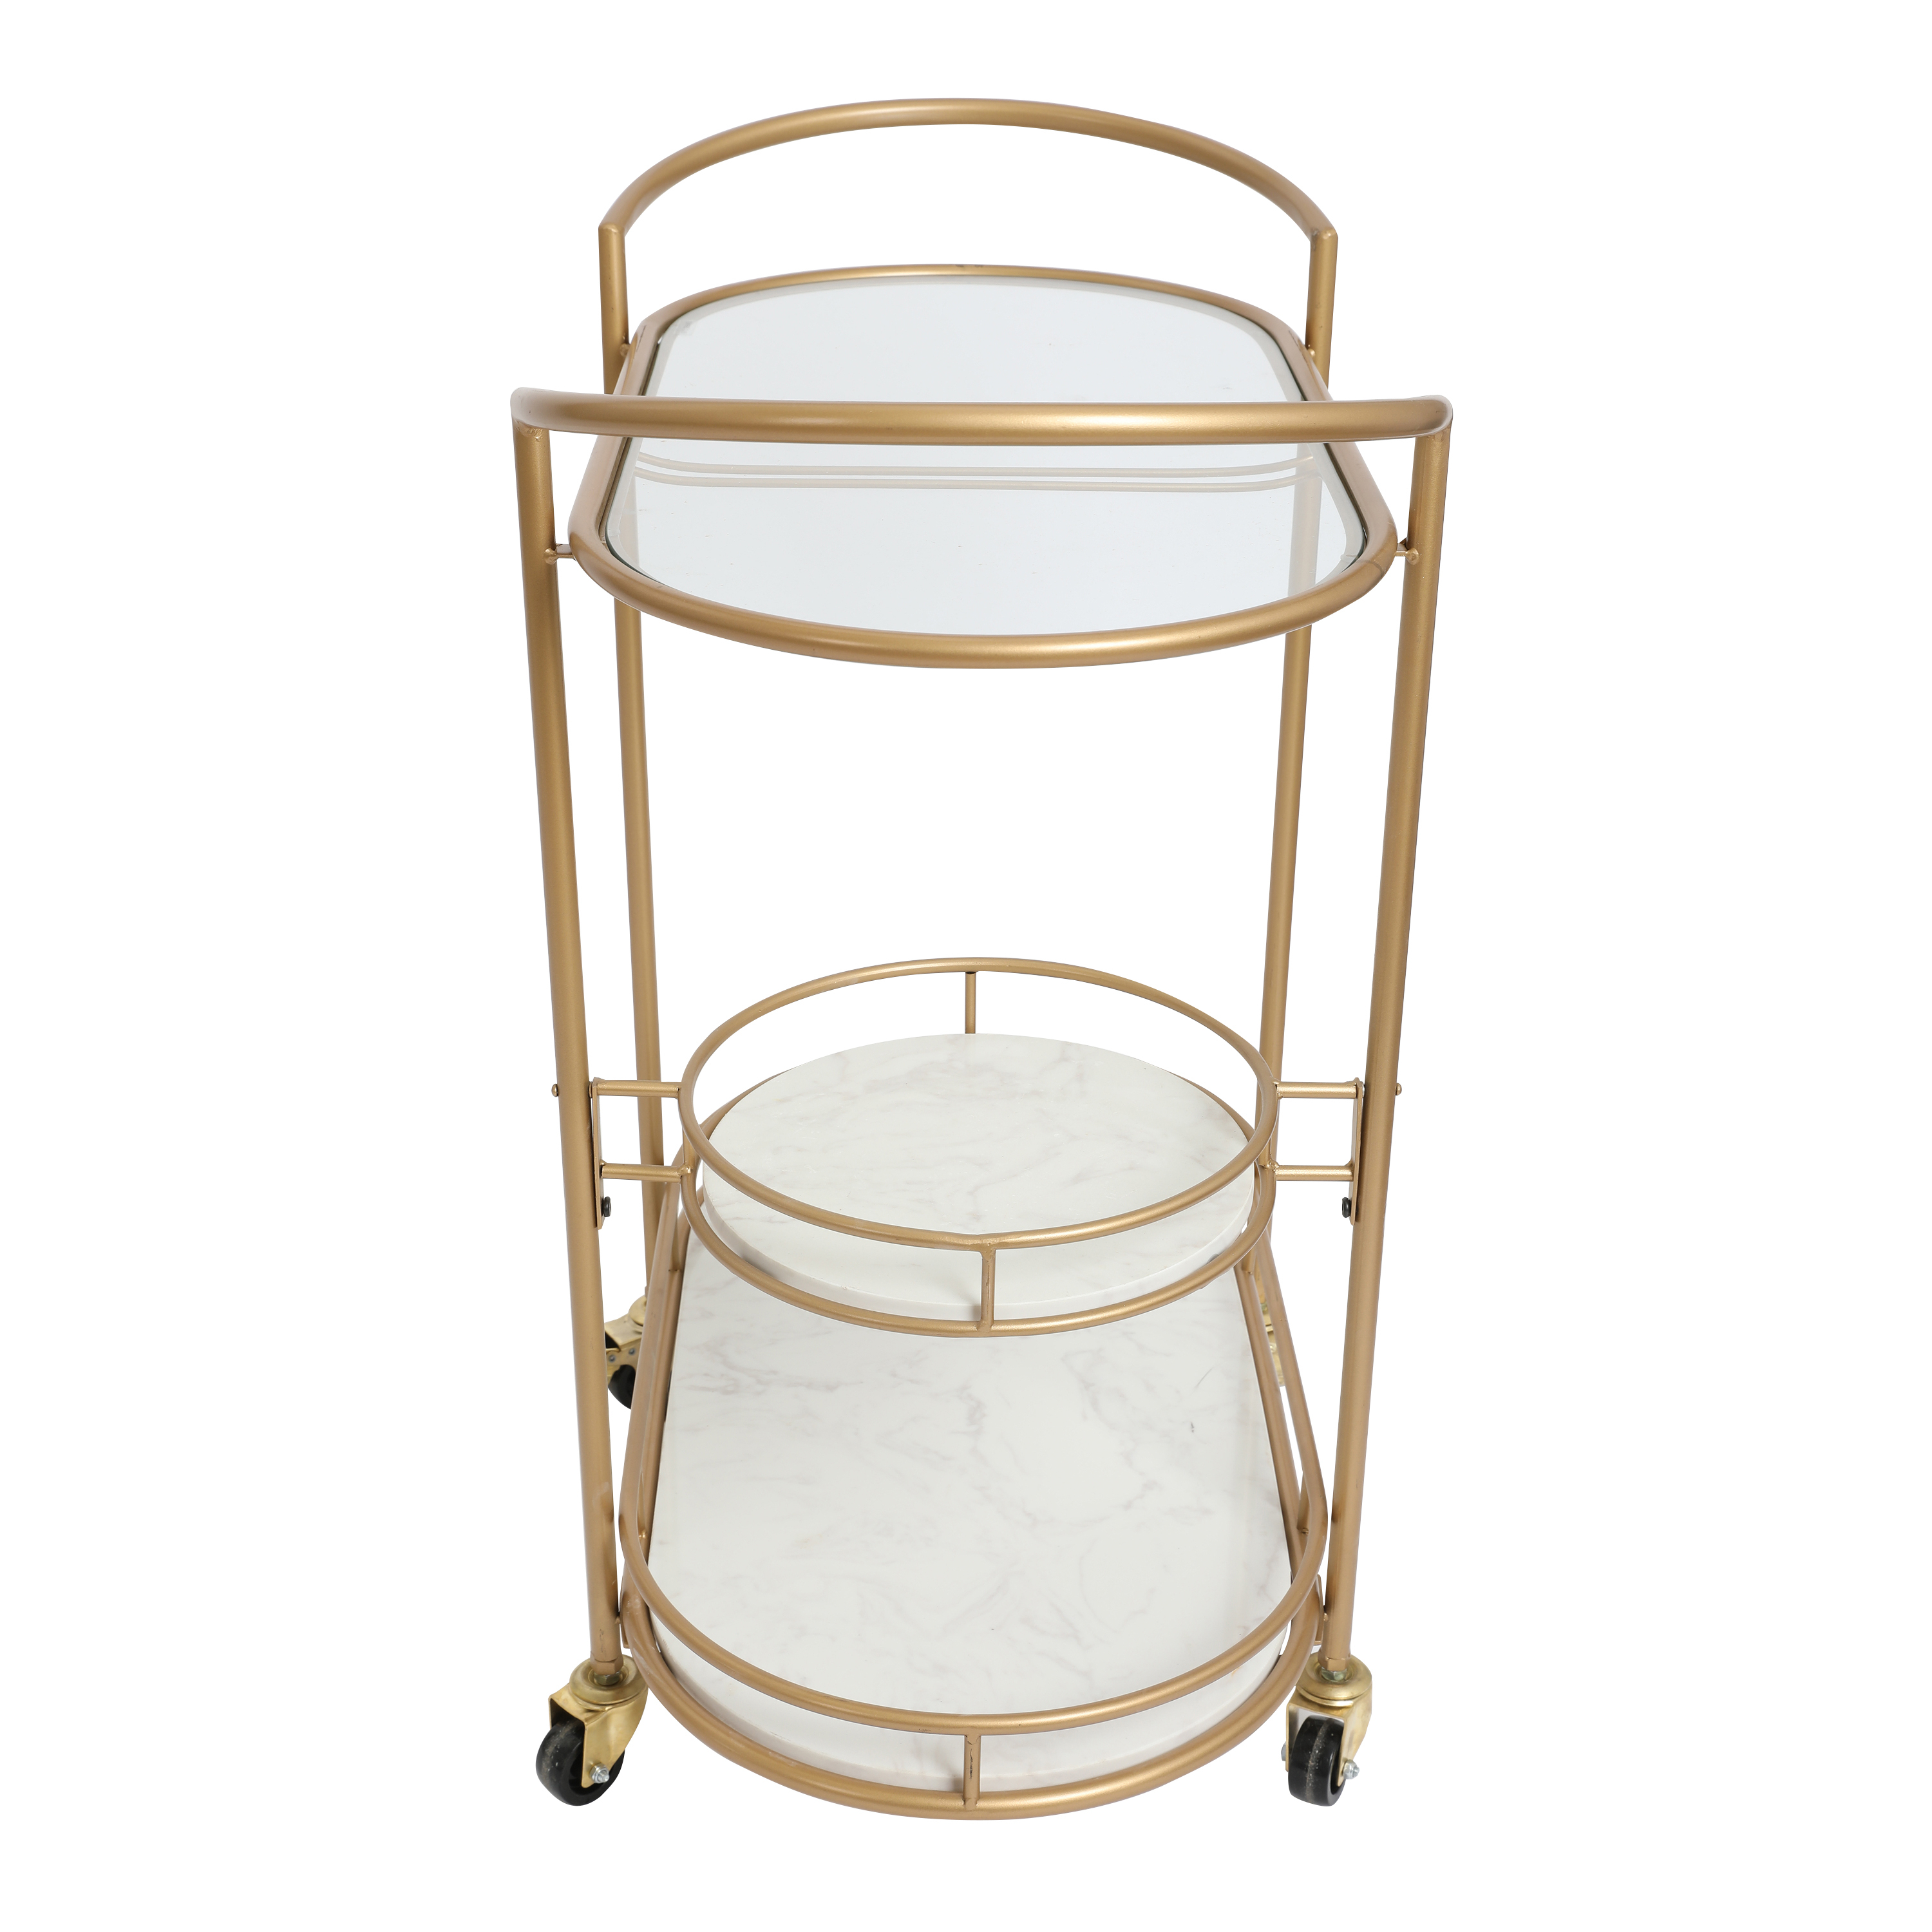 33 Inch Serving Cart, 3 Tier Glass And Marble Shelves, Gold Iron Frame, Lockable Casters - Saltoro Sherpi